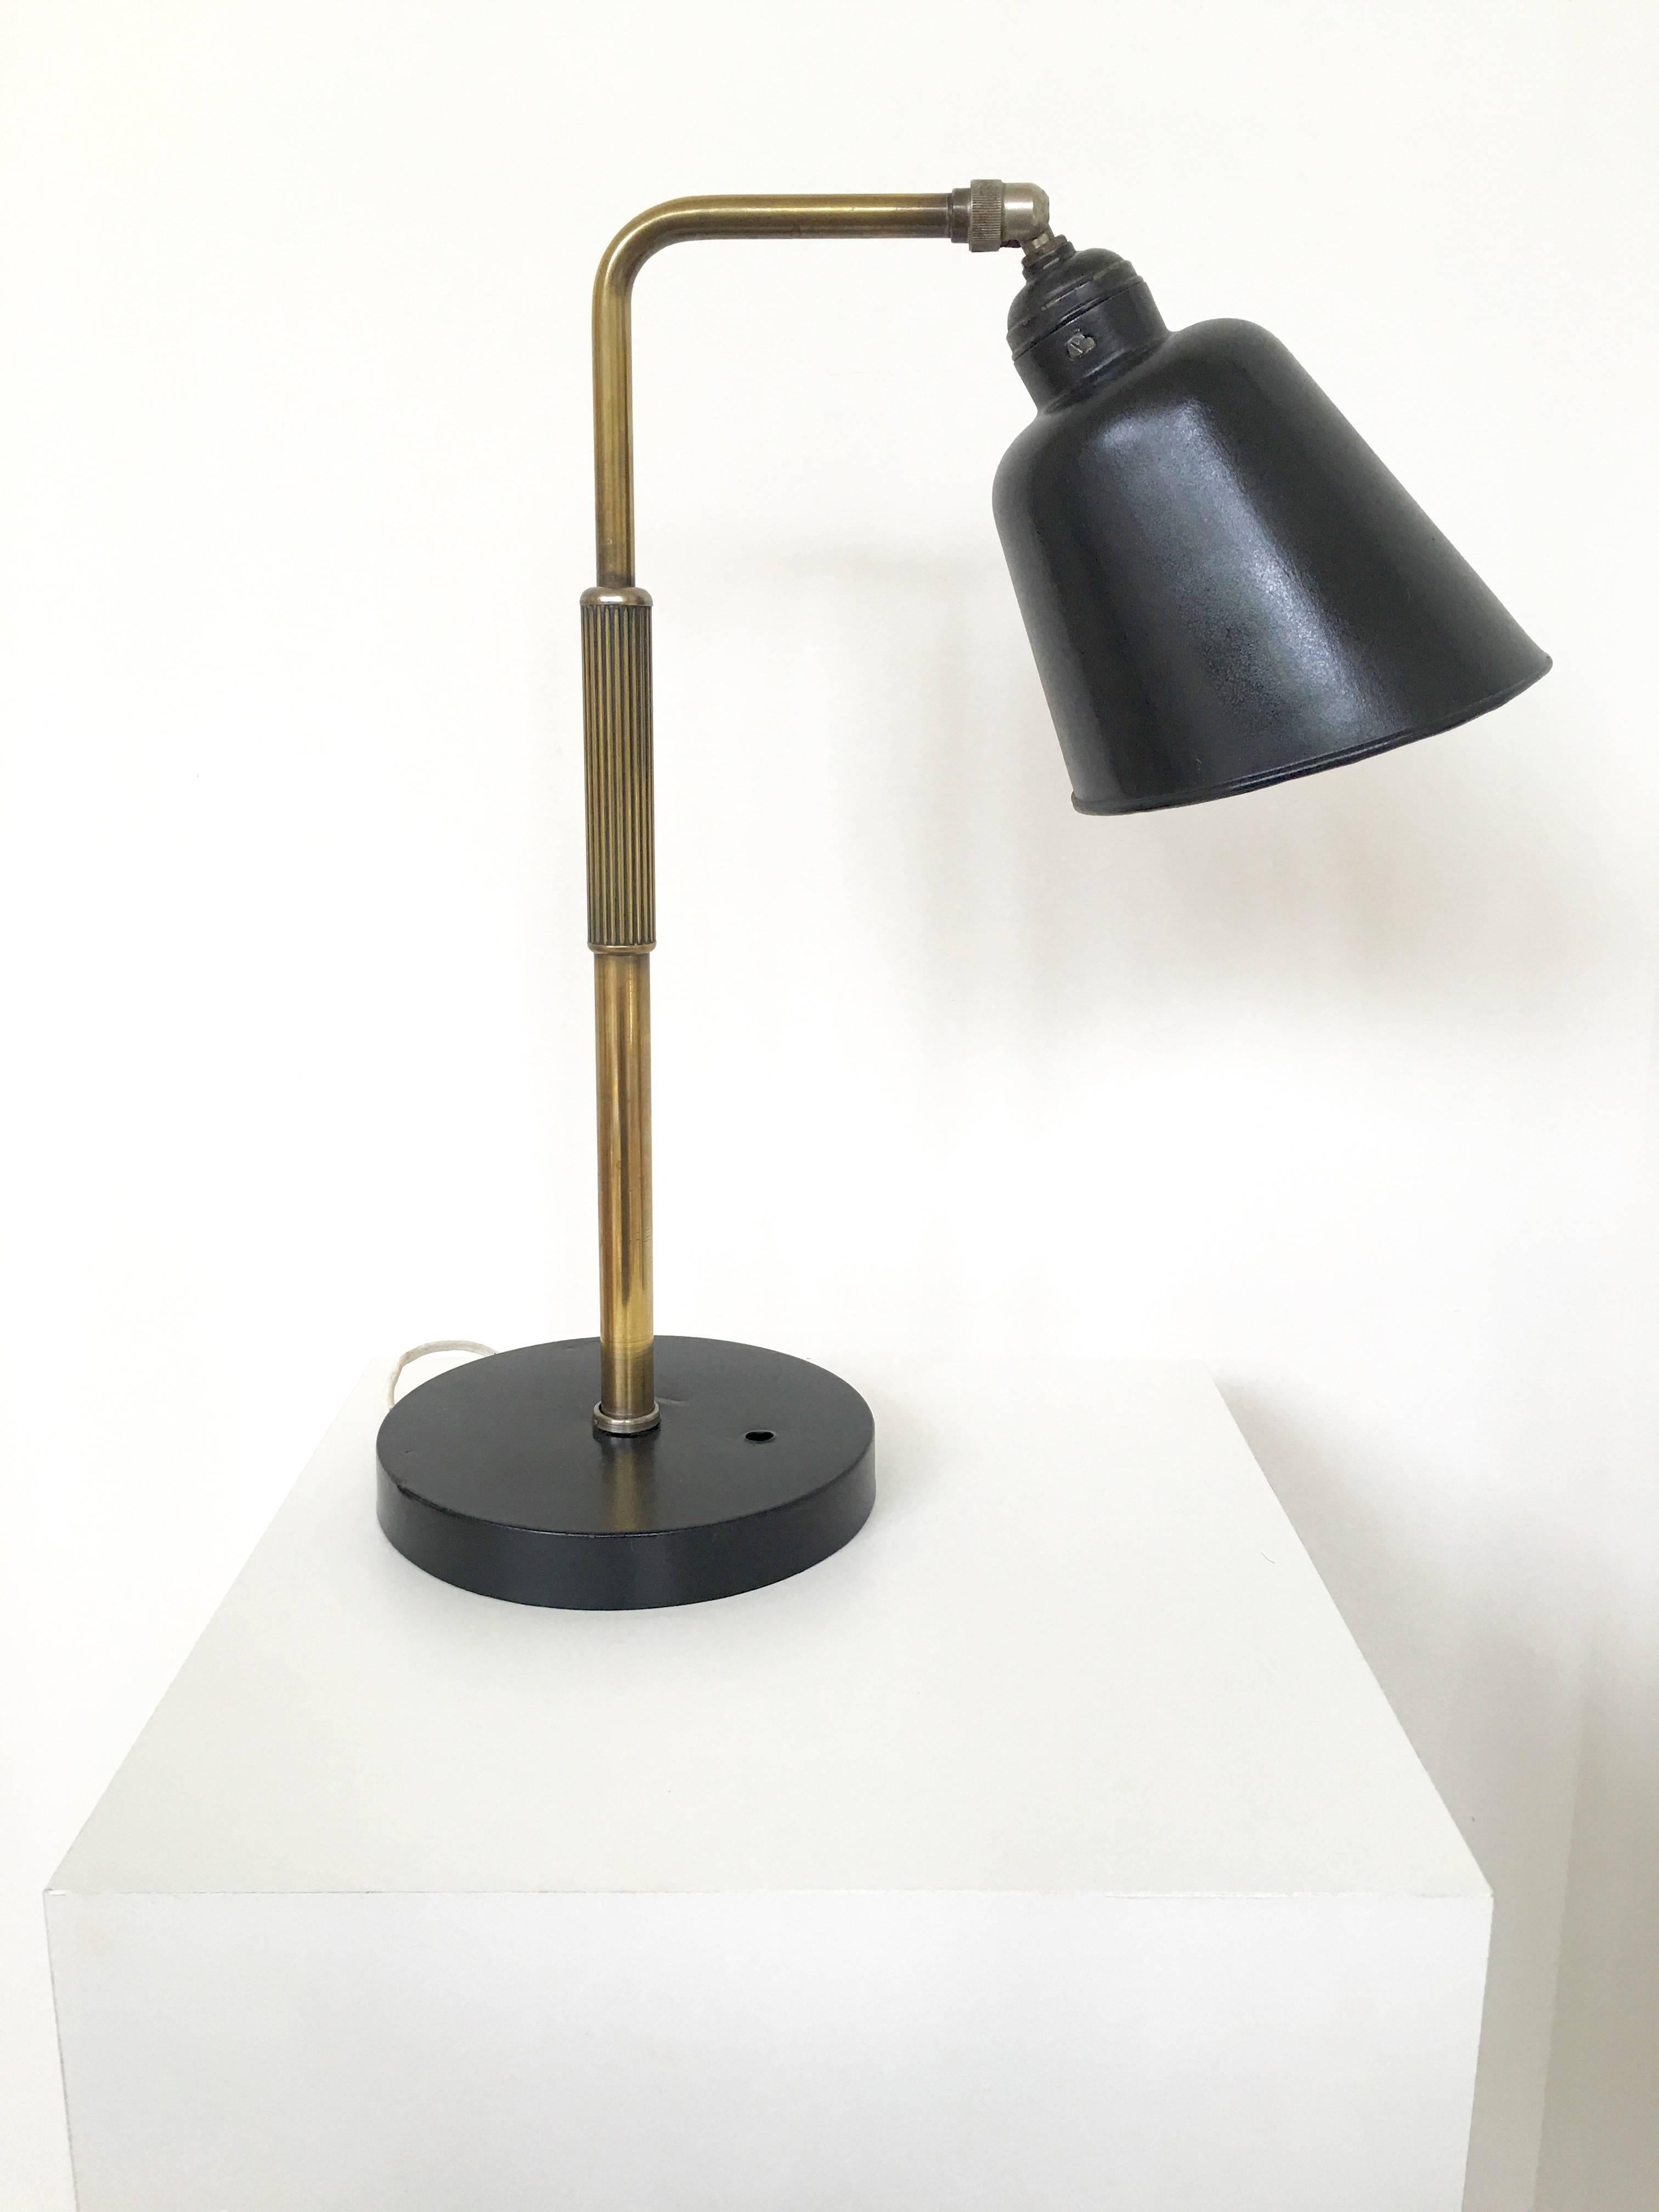 A classic Bauhaus style metal lamp with a black painted shade and base. Has a lovely Industrial quality to it much like those of Christian Dell.